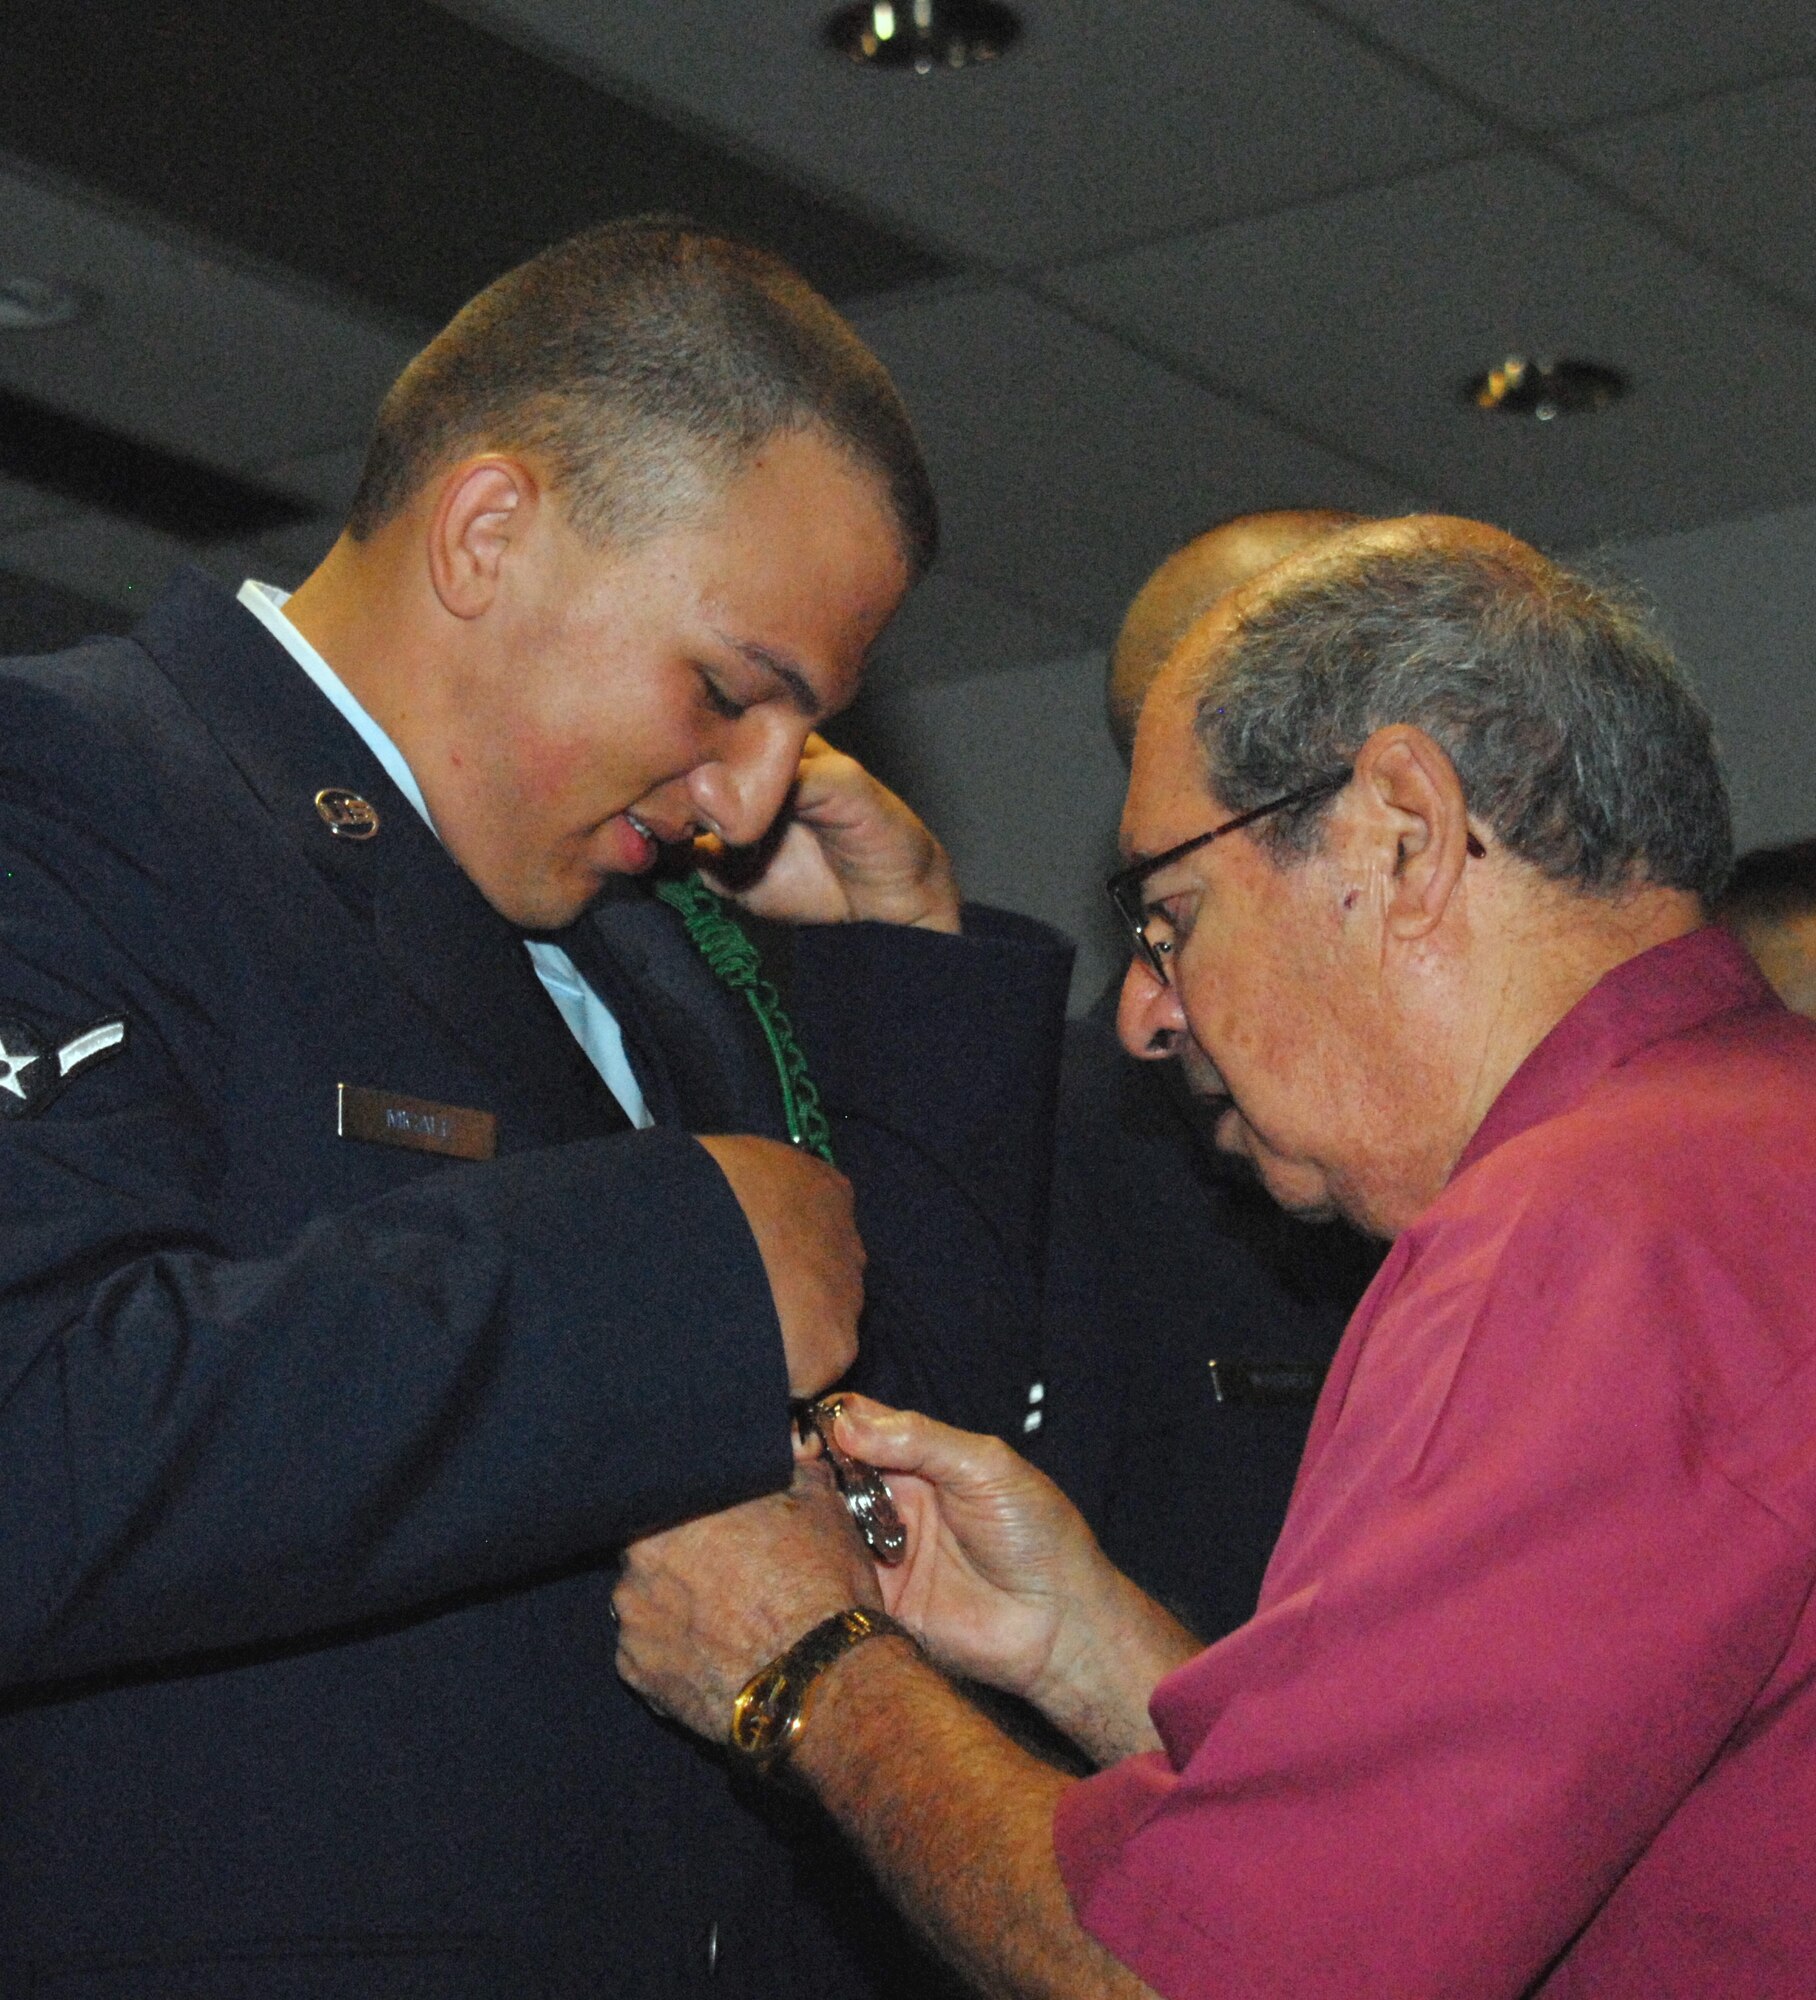 Airman 1st Class Laurence Micale watches as his grandfather, retired Col. Peter Micale III, pins on his new fire protection badge during the graduation ceremony July 1. Airman Micale is a third generation Air Force member with family ties going back to the start of the Air Force. (U.S. Air Force photo/Connie Hempel)